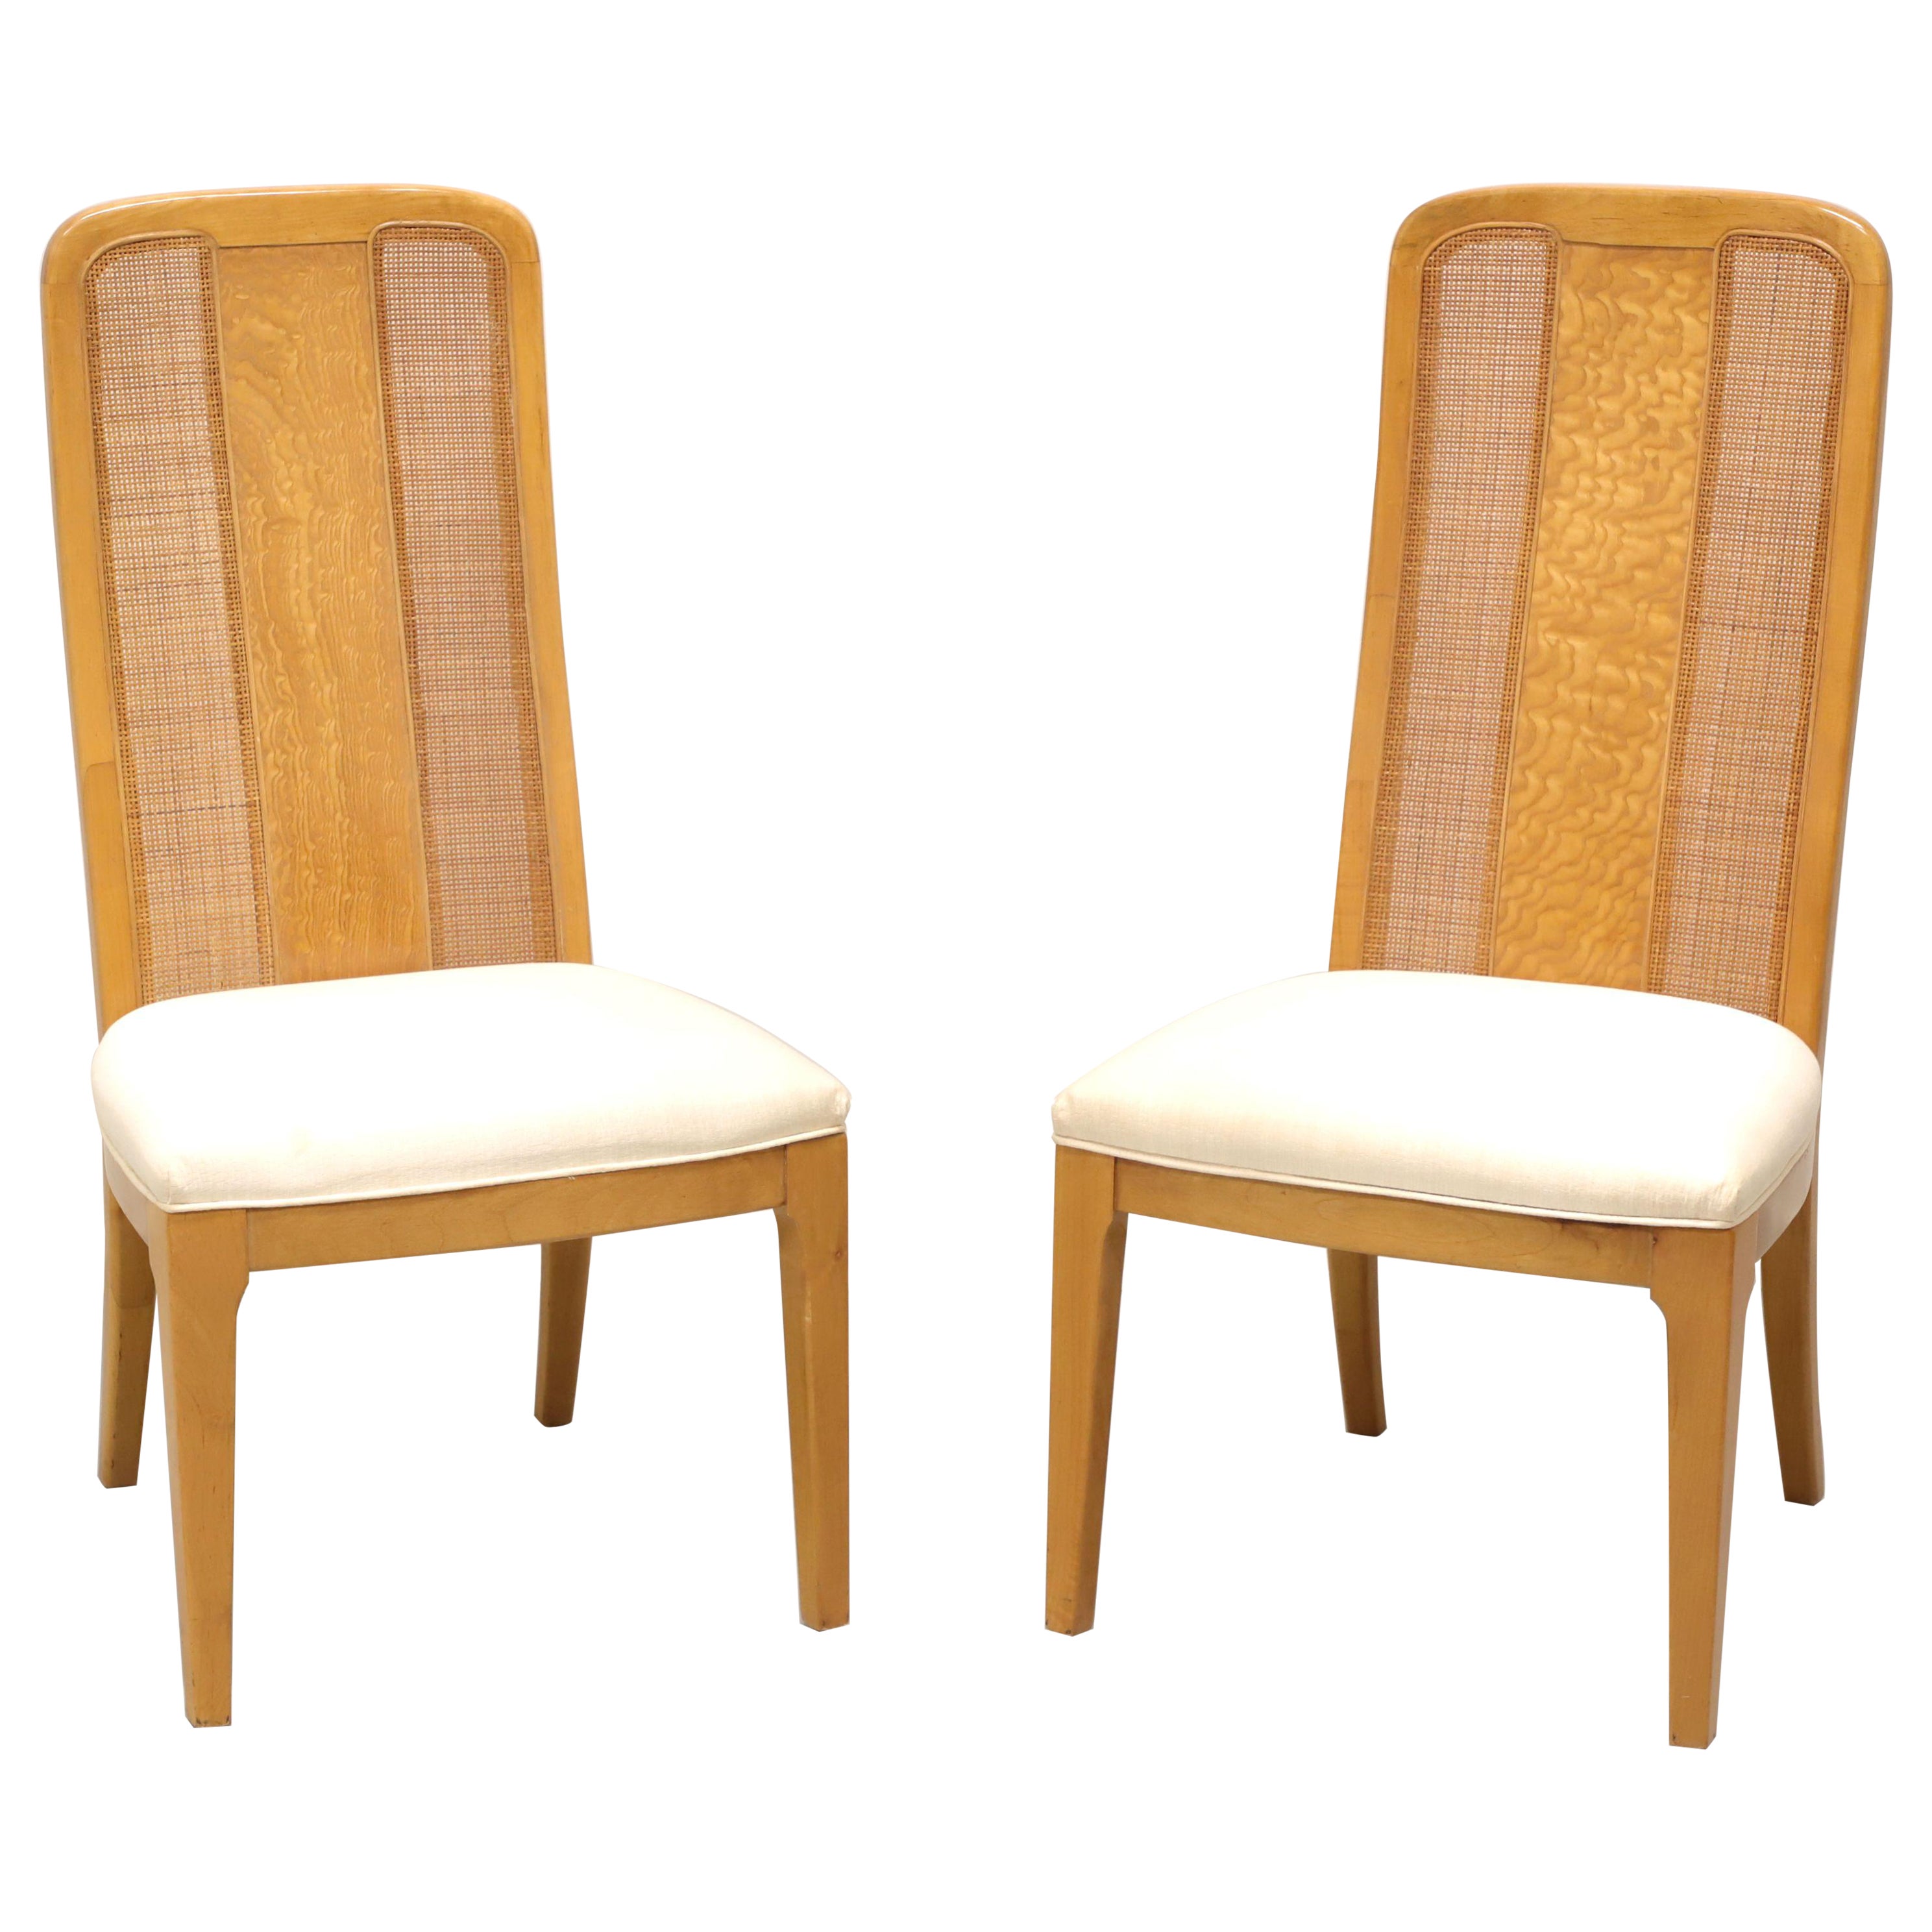 BERNHARDT Caned Burl Maple Contemporary Dining Side Chair - Pair A For Sale